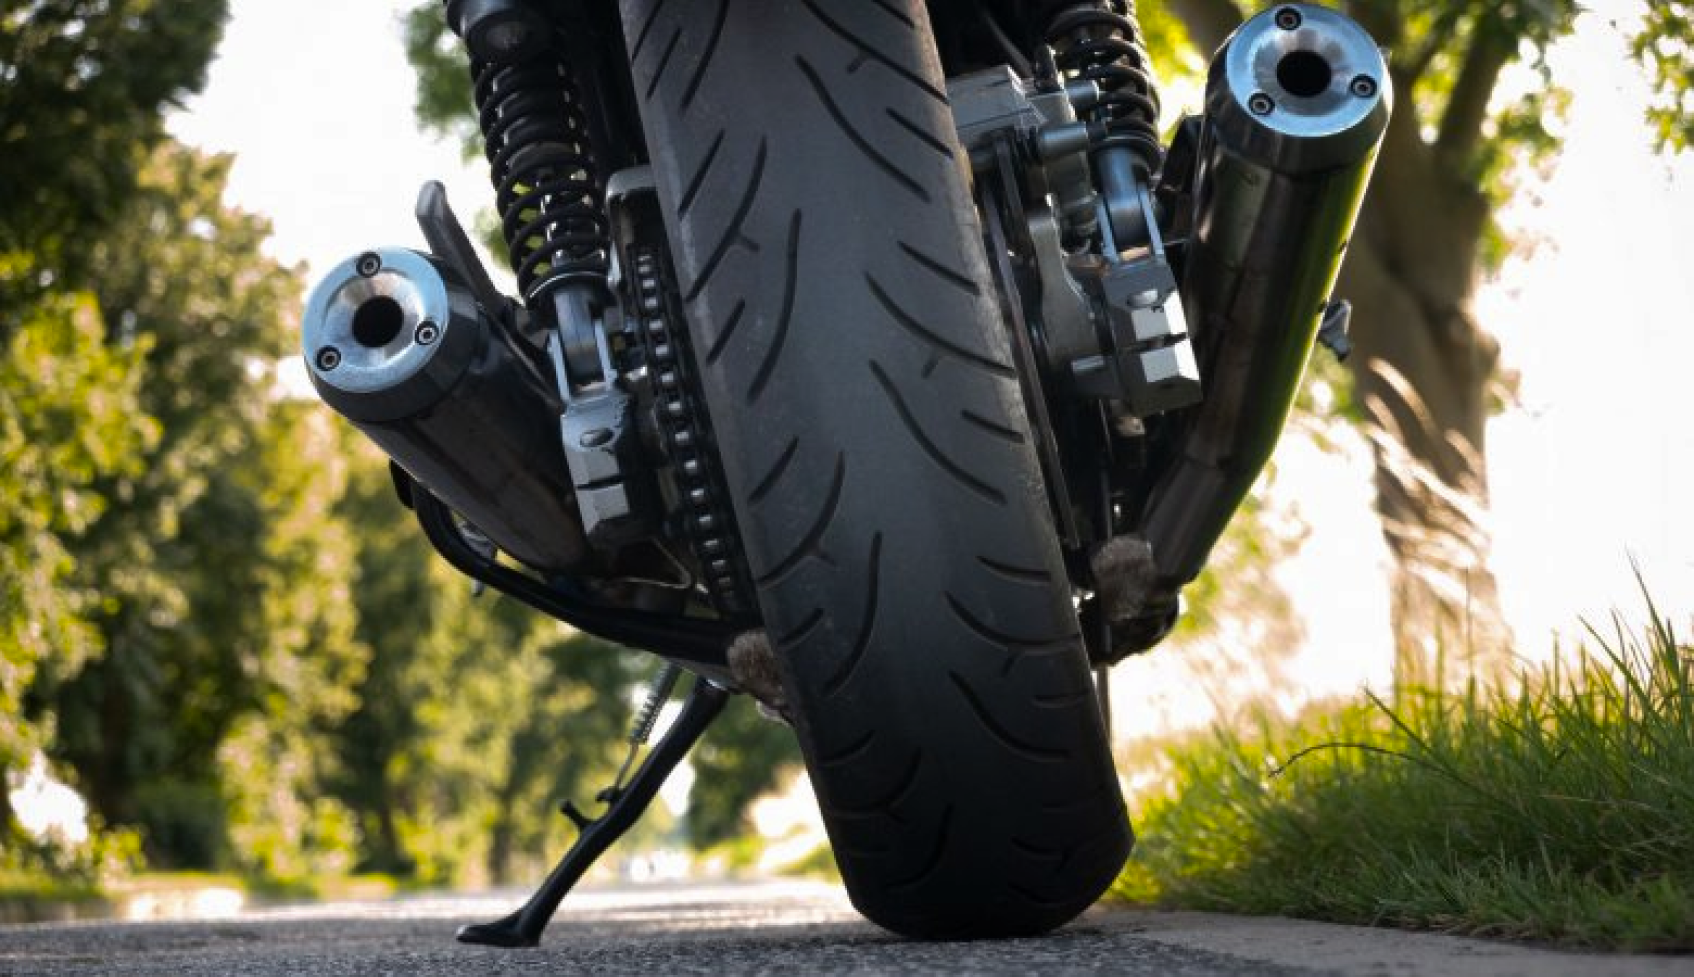 motorcycle viewed from the rear showing exhaust pipes